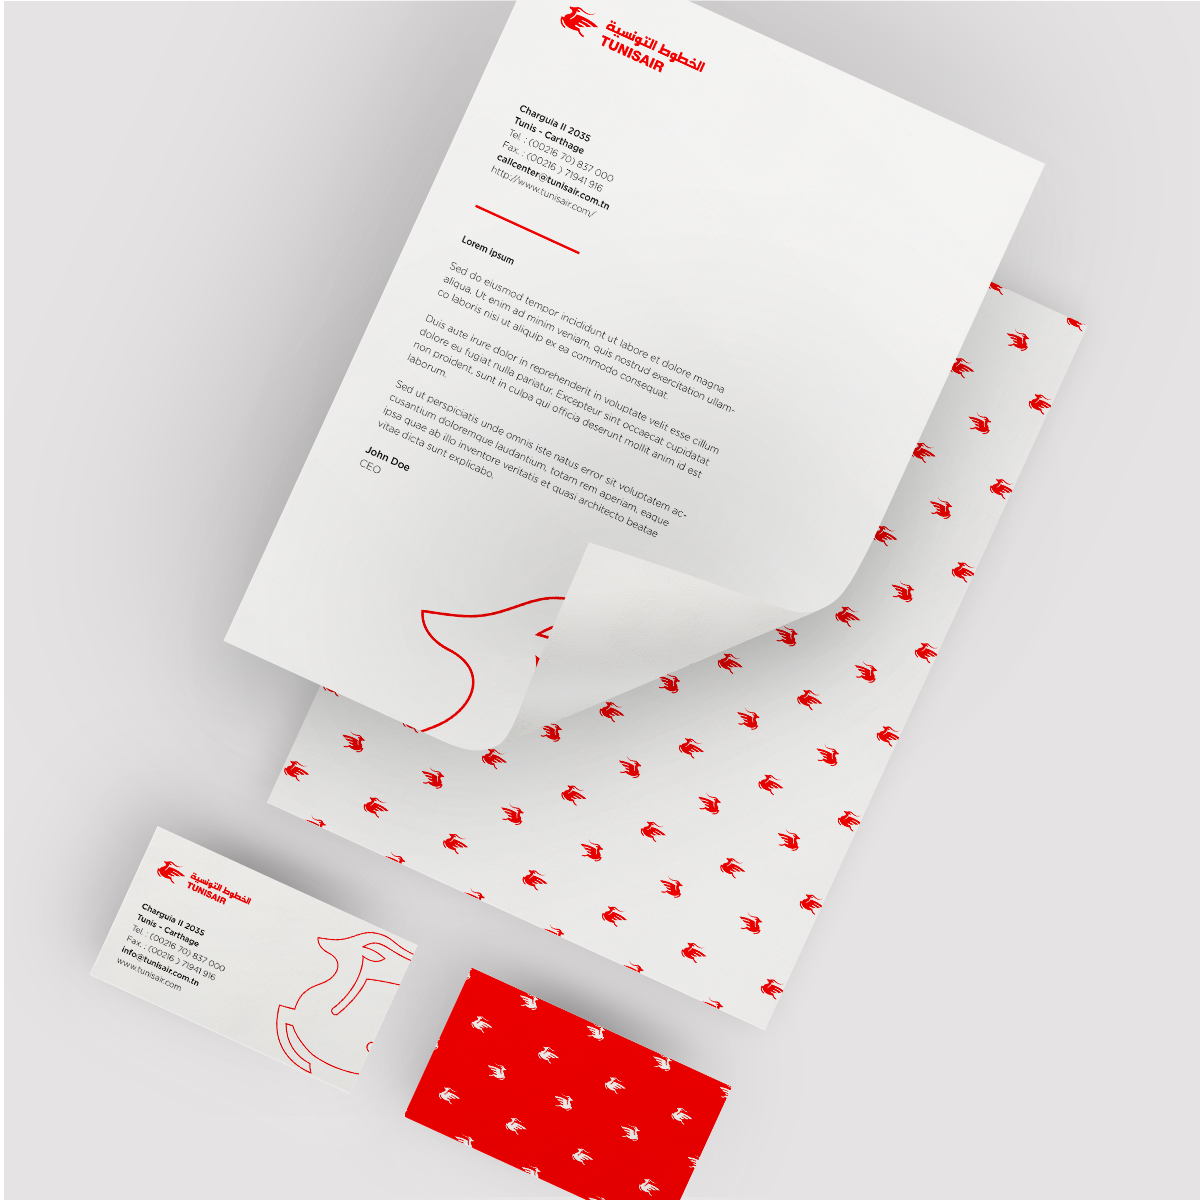 logo Stationery business card airport airplane Airlines Tunisair tunisia flight identity red visual Boarding Pass